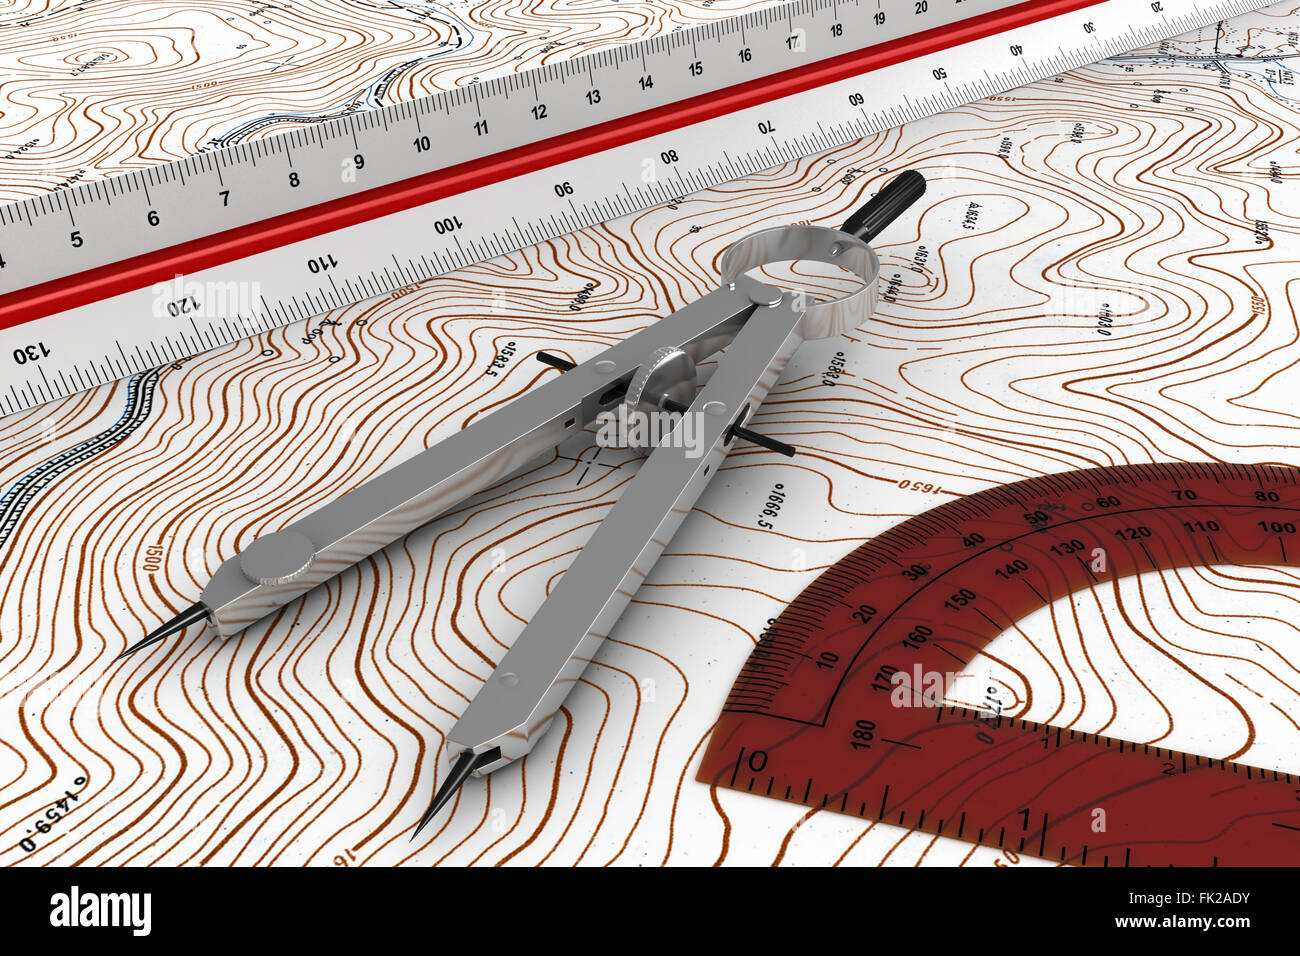 Architecture planning tools map pen pencil ruler calculator drawing compass  divider ; india ; asia Stock Photo - Alamy